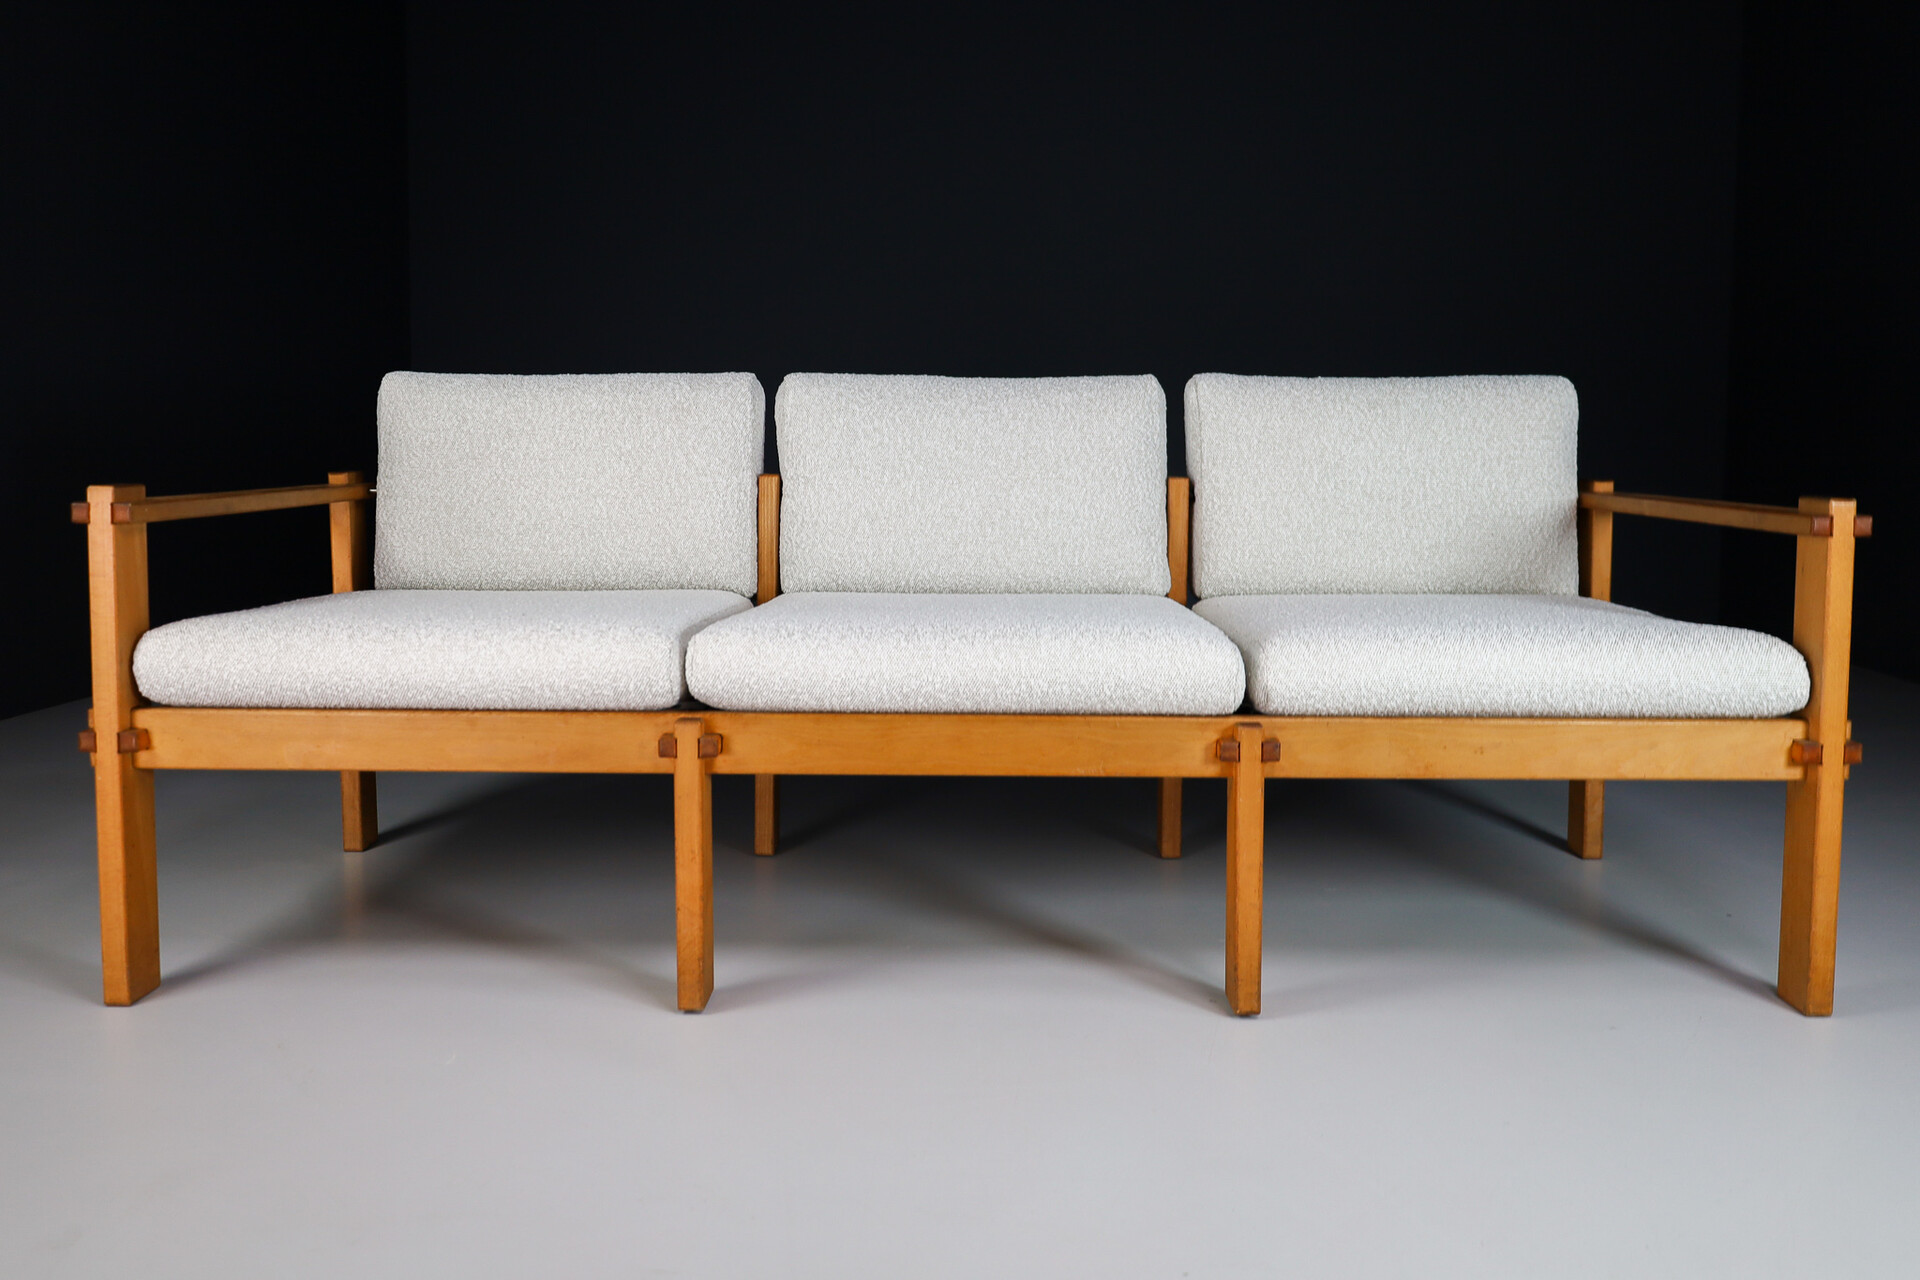 gevangenis angst groef Mid century modern Farmer Three seat sofa in New Bouclé wool fabric By Gerd  Lange For Bofinger, Germany 1960s Mid-20th century - Sofas - Items by  category - European ANTIQUES & DECORATIVE